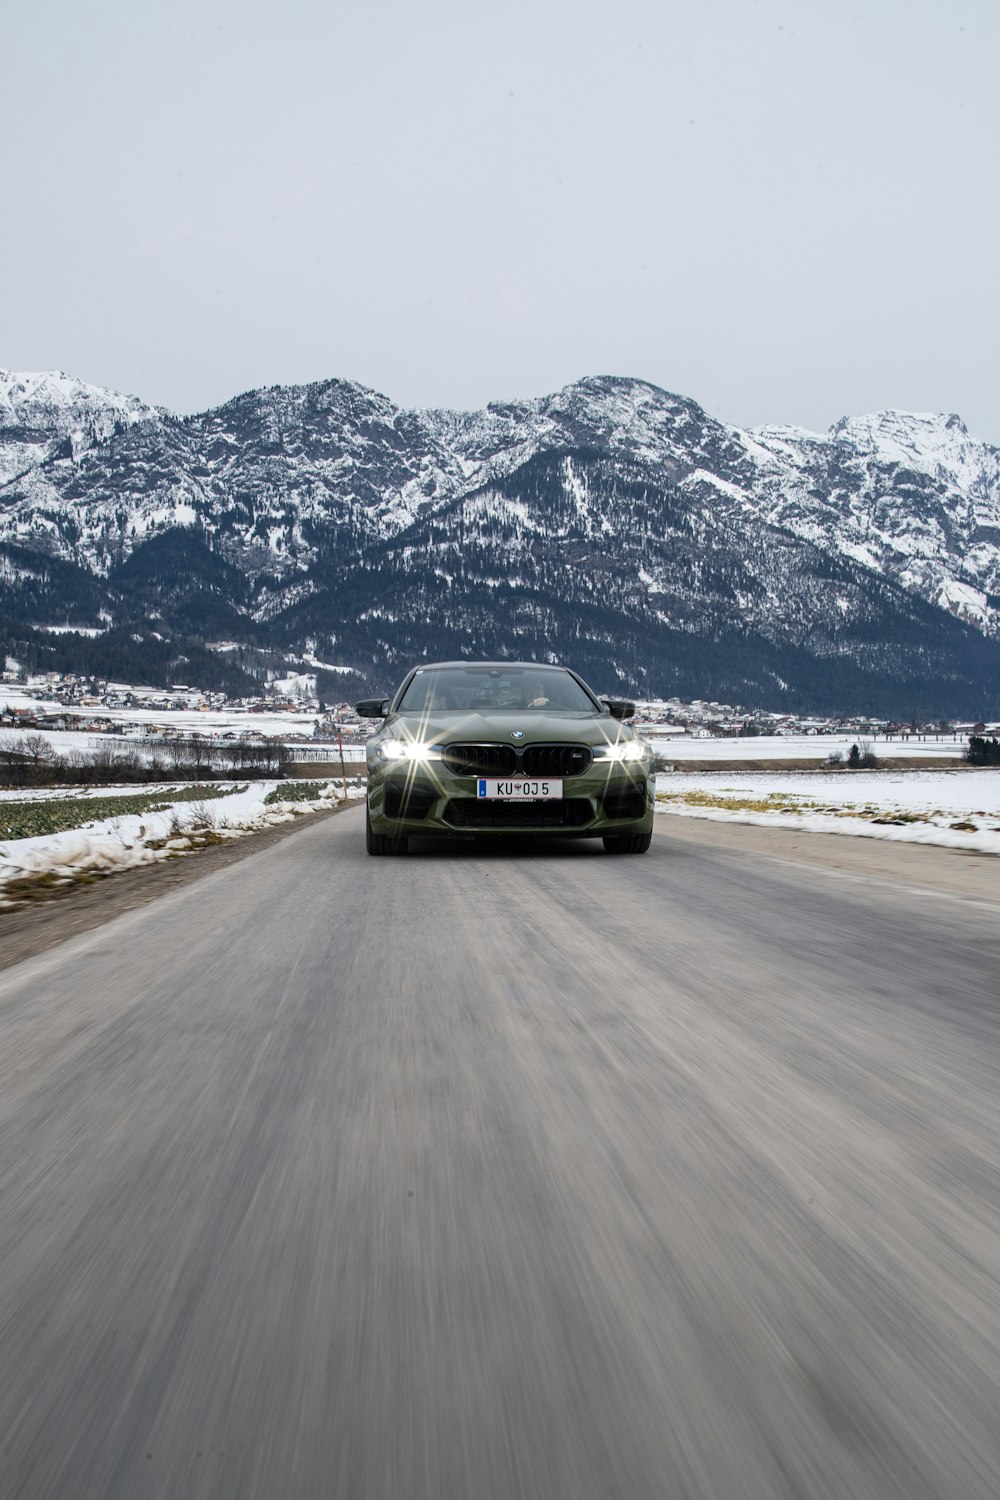 a car driving on a road with snow covered mountains in the background